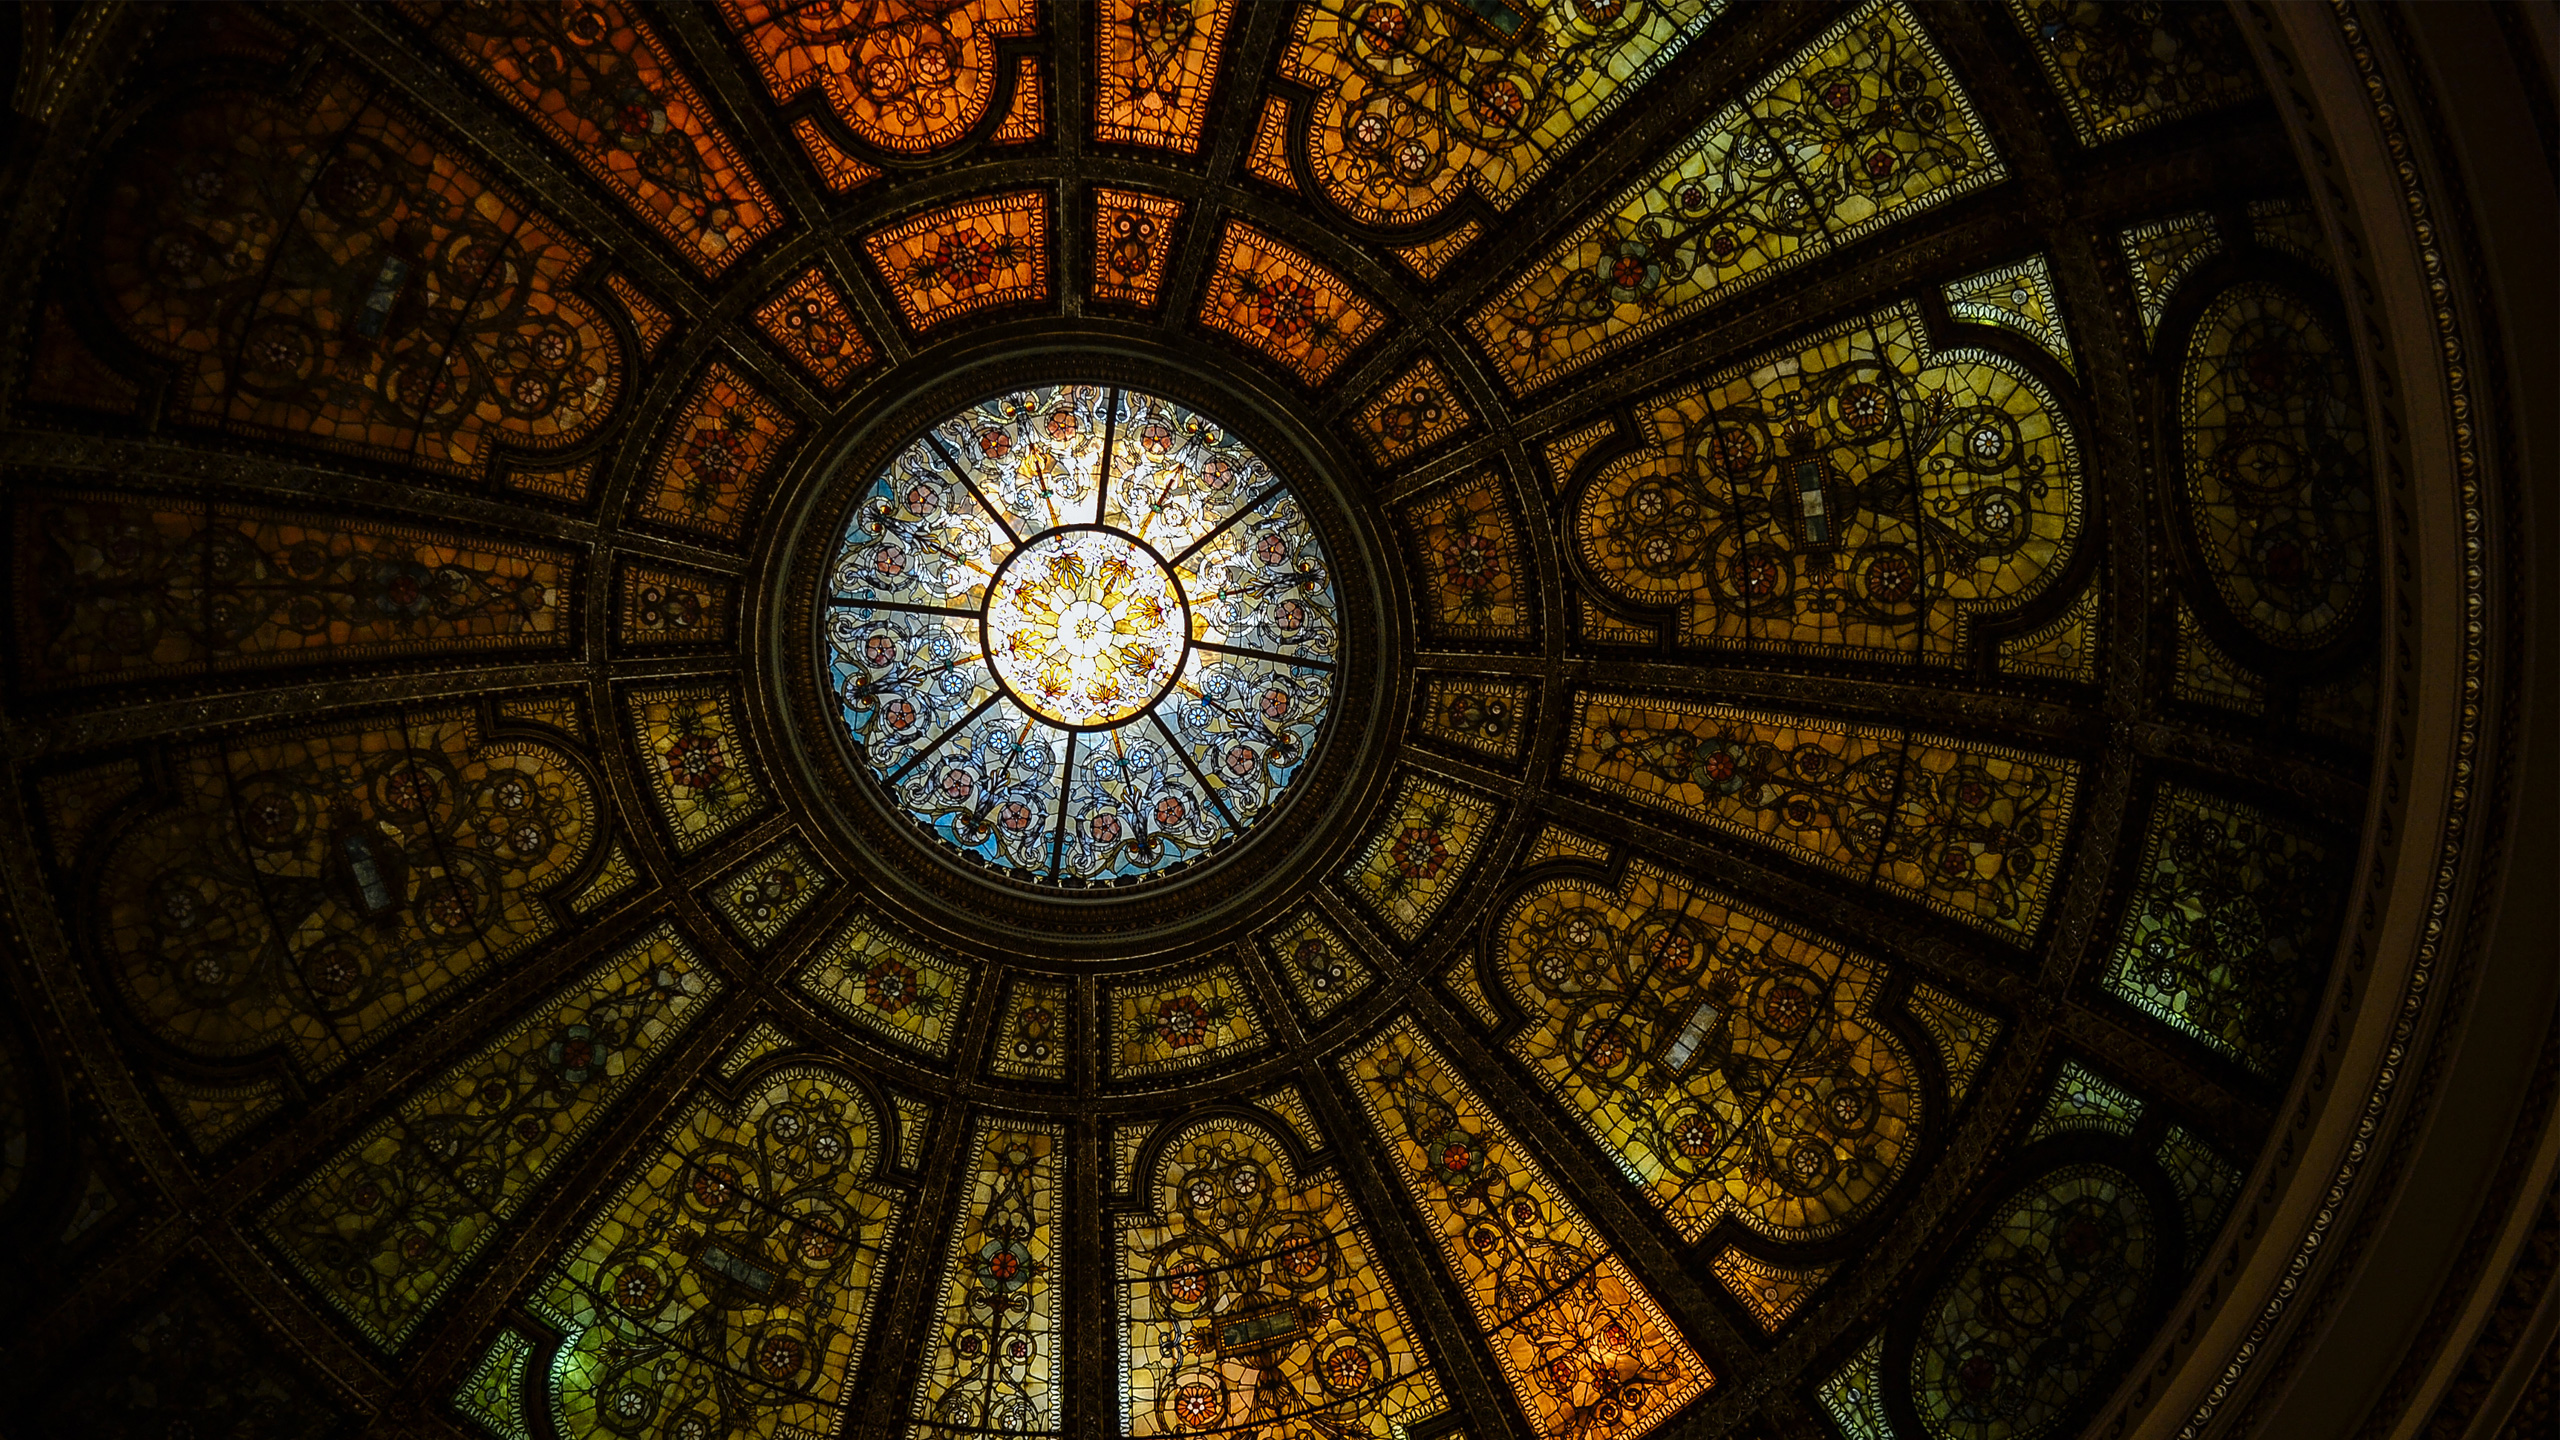 Wallpaper 4k Chicago Cultural Center Dome And